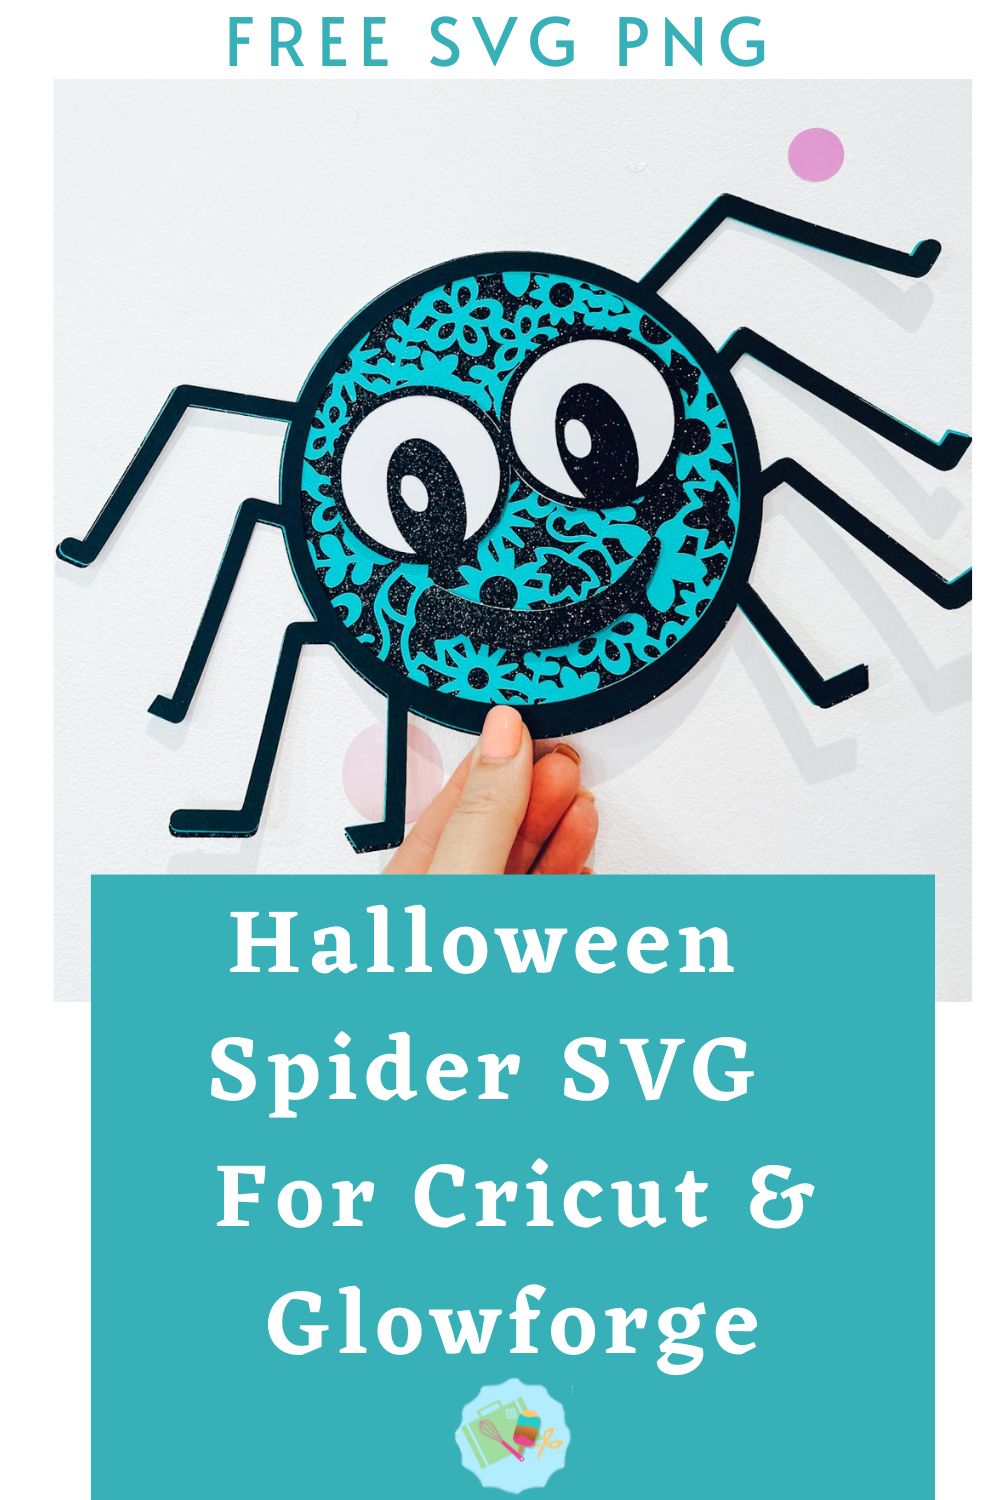 Free Halloween Spider SVG, PNG for Cricut, Glowforge and Silhouette